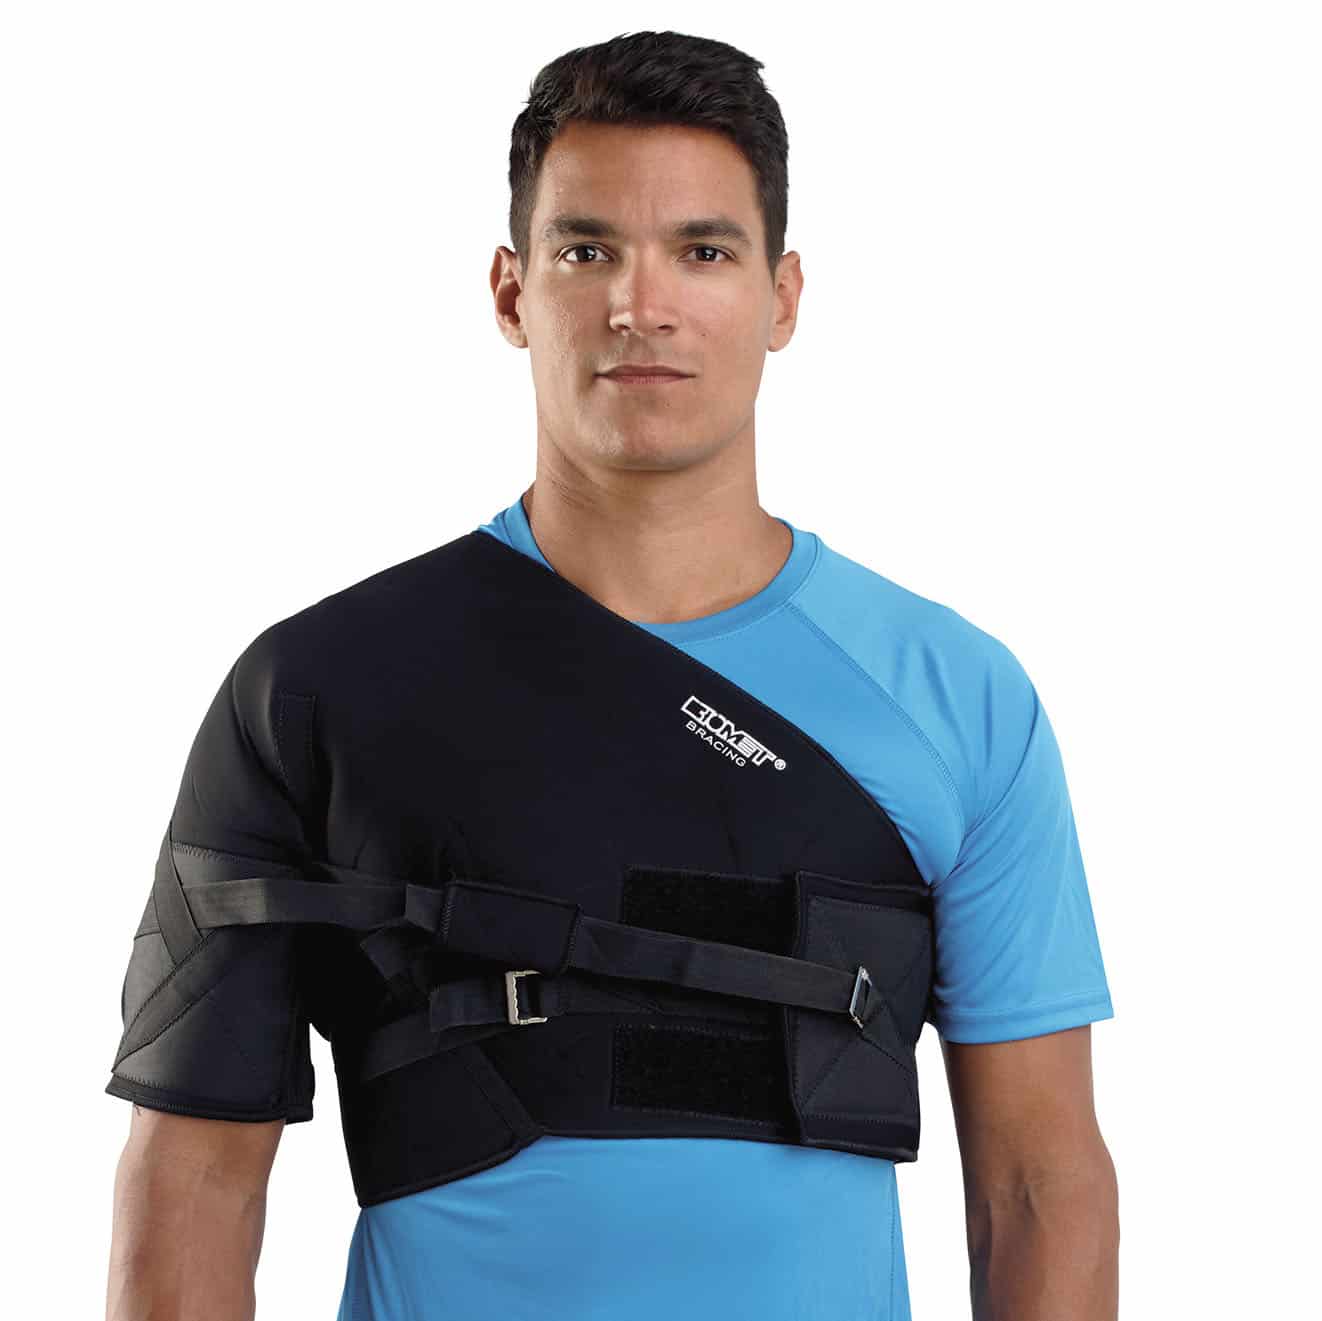 Ultra Shoulder Support Brace with Stability Control